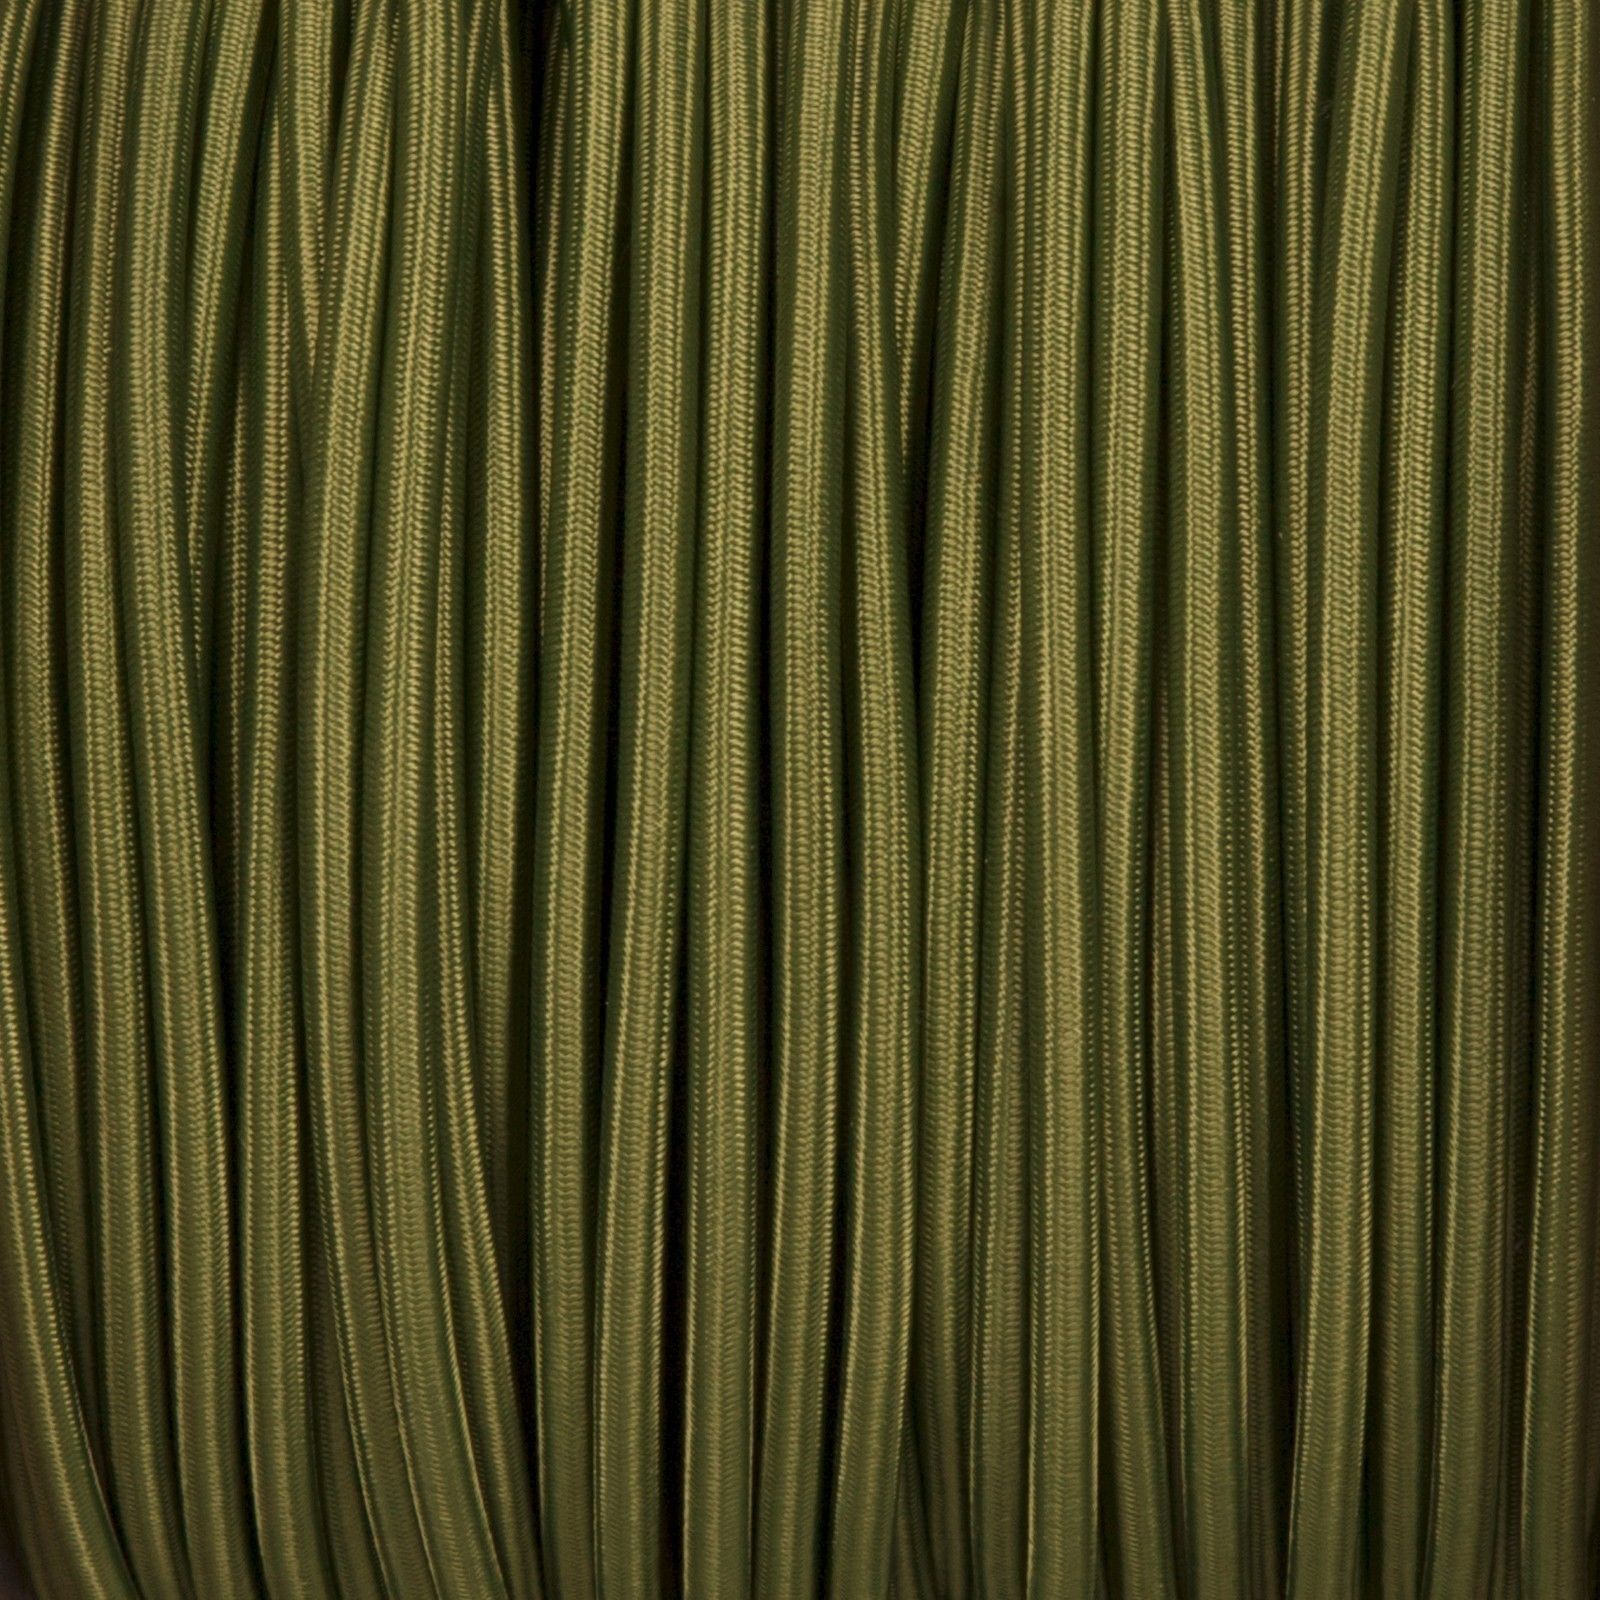 3-Core Round Cable in army green.JPG